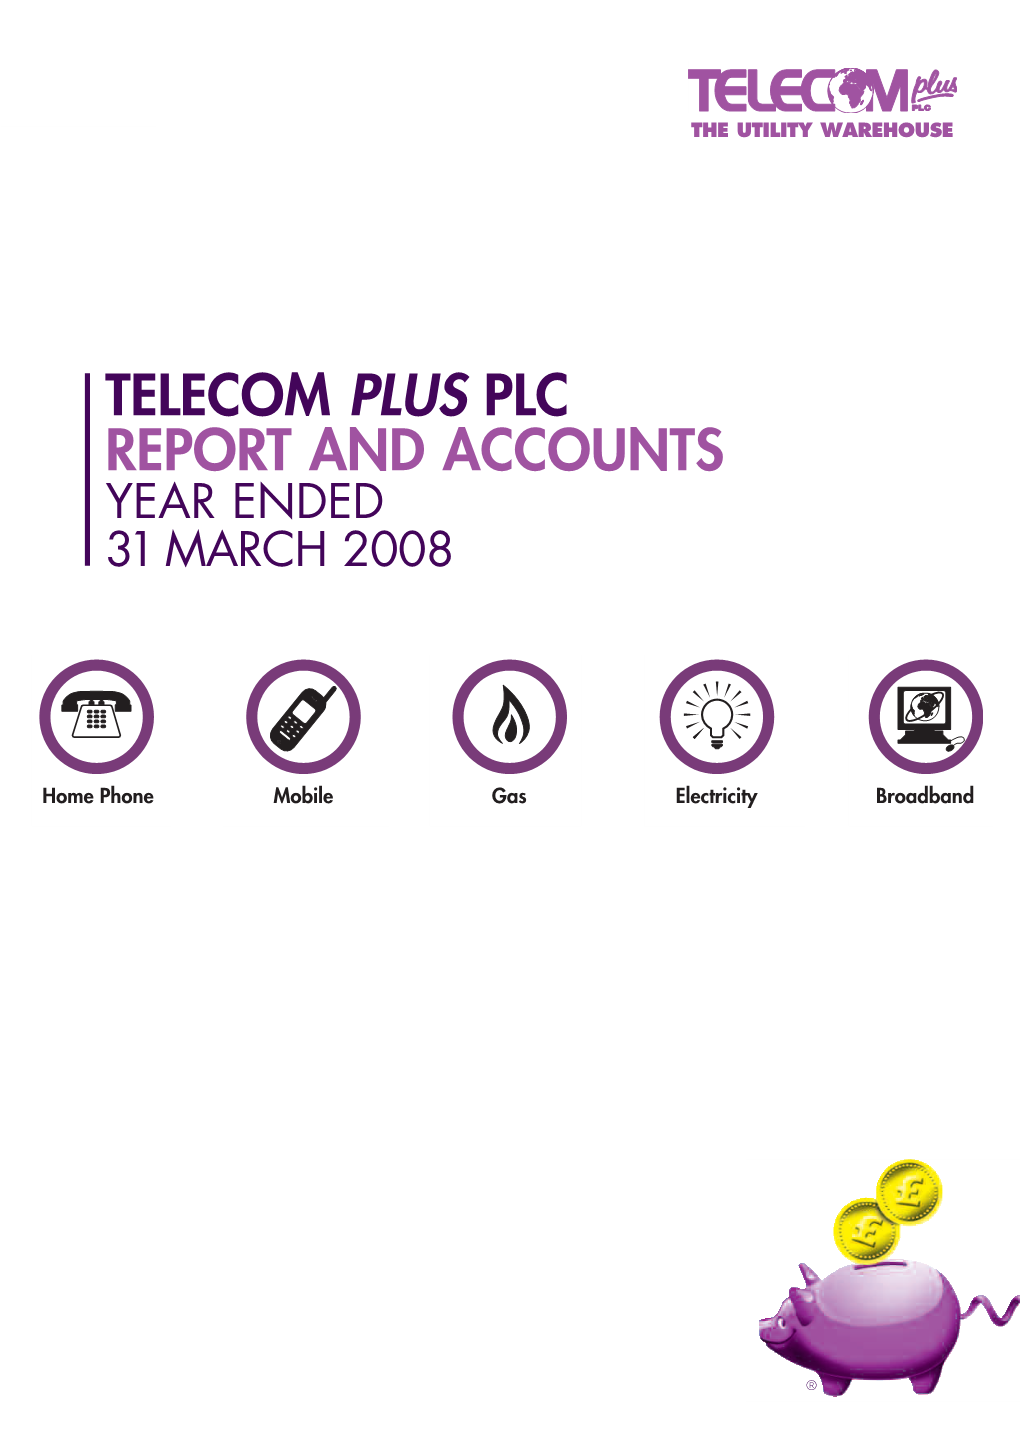 Telecom Plus Plc Report and Accounts Year Ended 31 March 2008